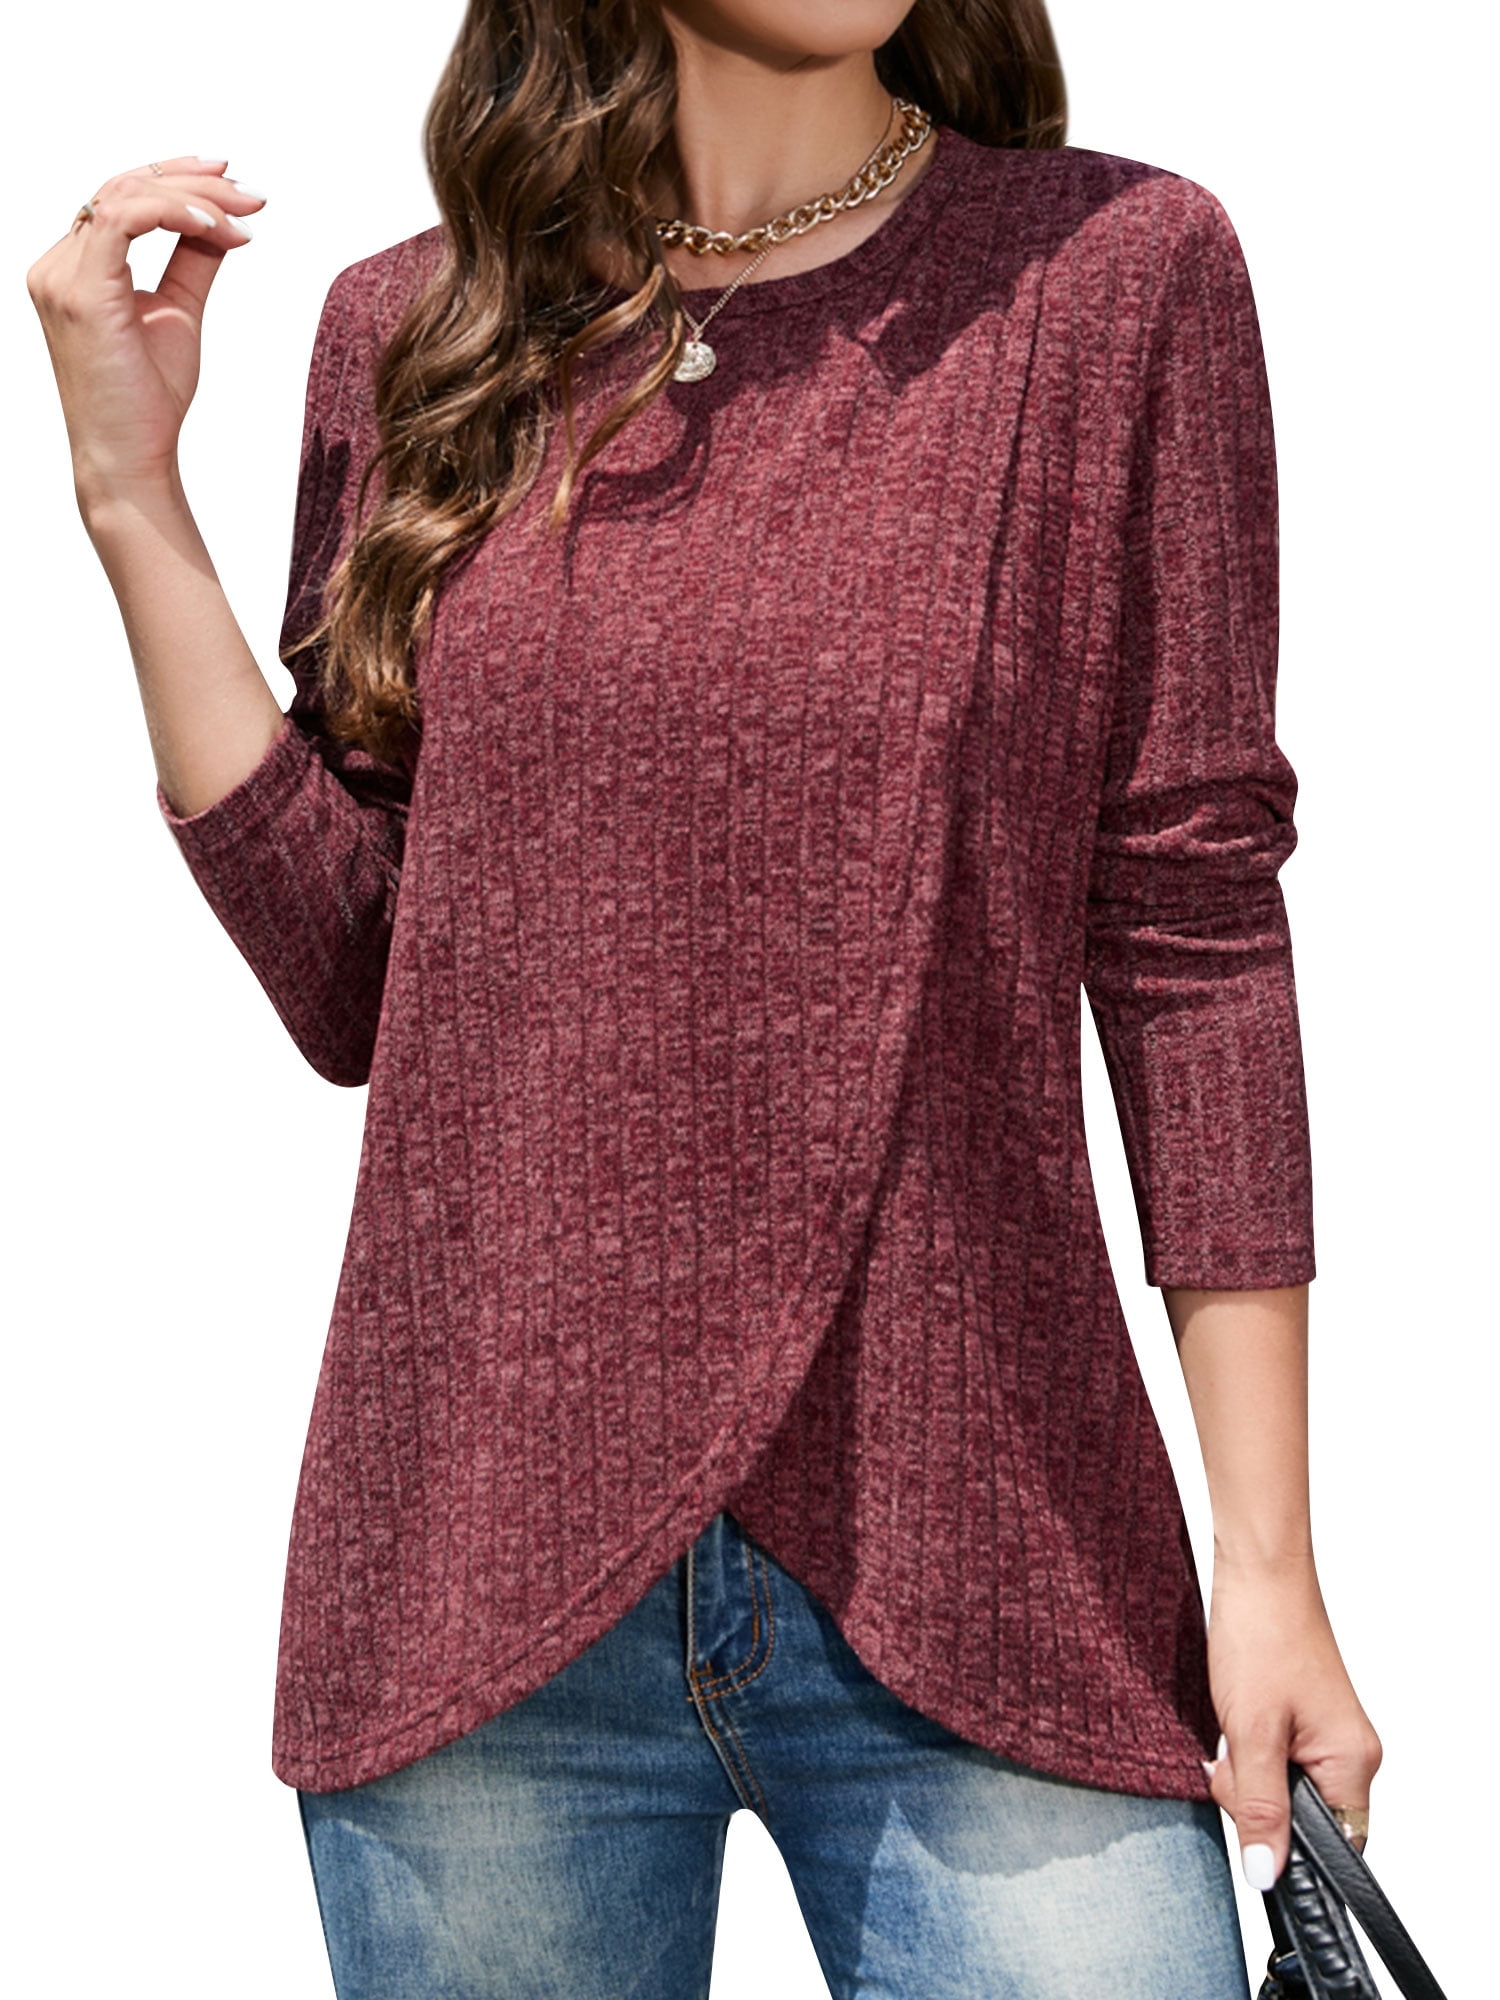 ZXZY Women Knitted Front Split Crew Neck Long Sleeve Solid Color Top